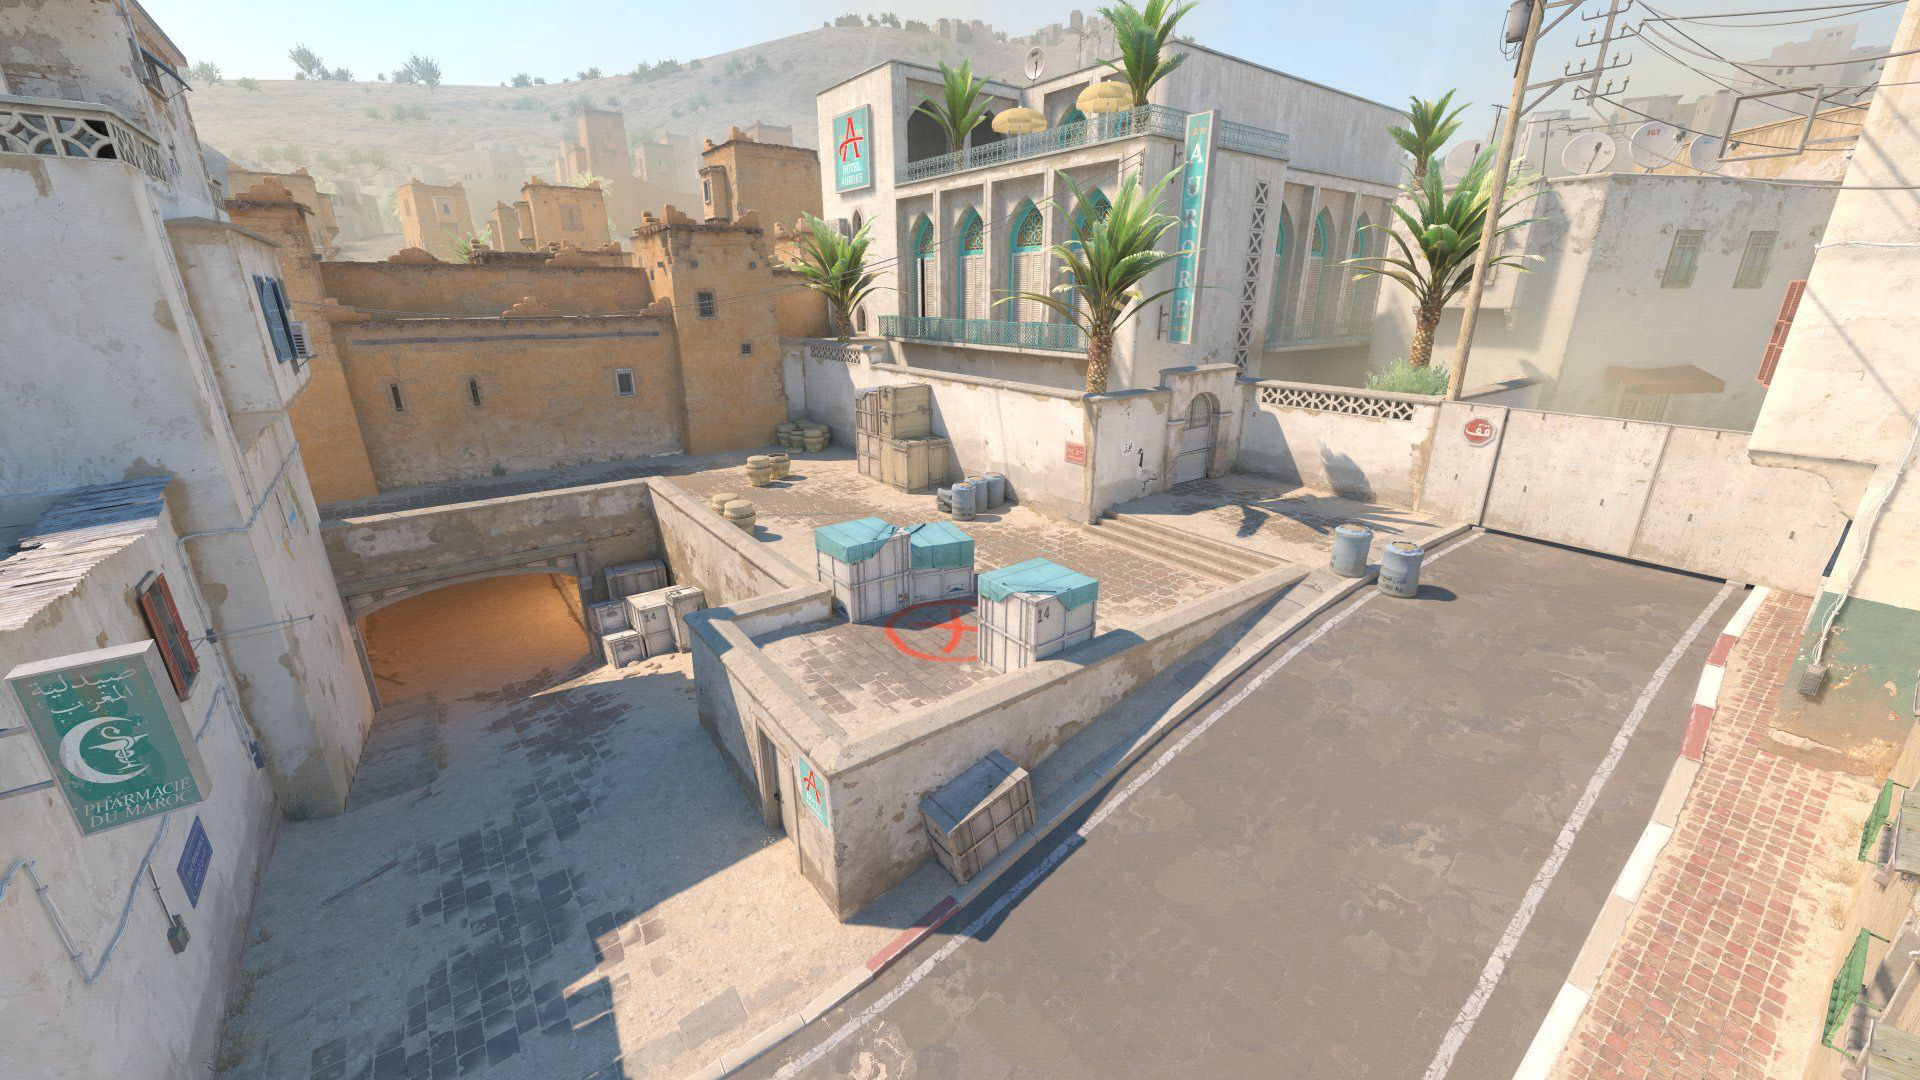 Counter Strike 2 Maps Dust 2 